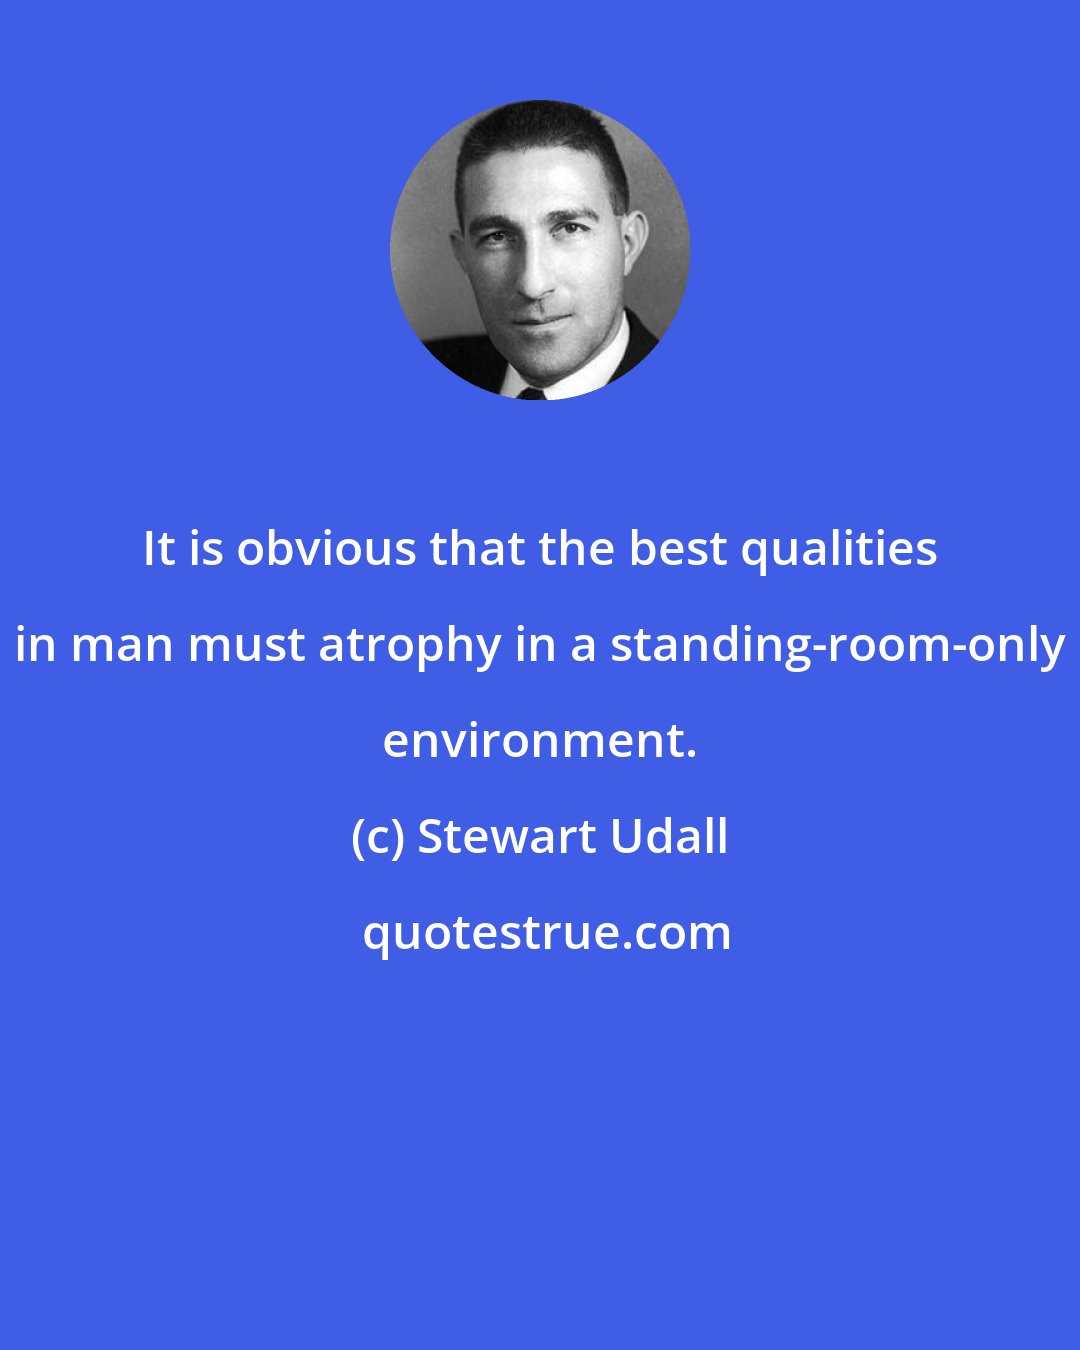 Stewart Udall: It is obvious that the best qualities in man must atrophy in a standing-room-only environment.